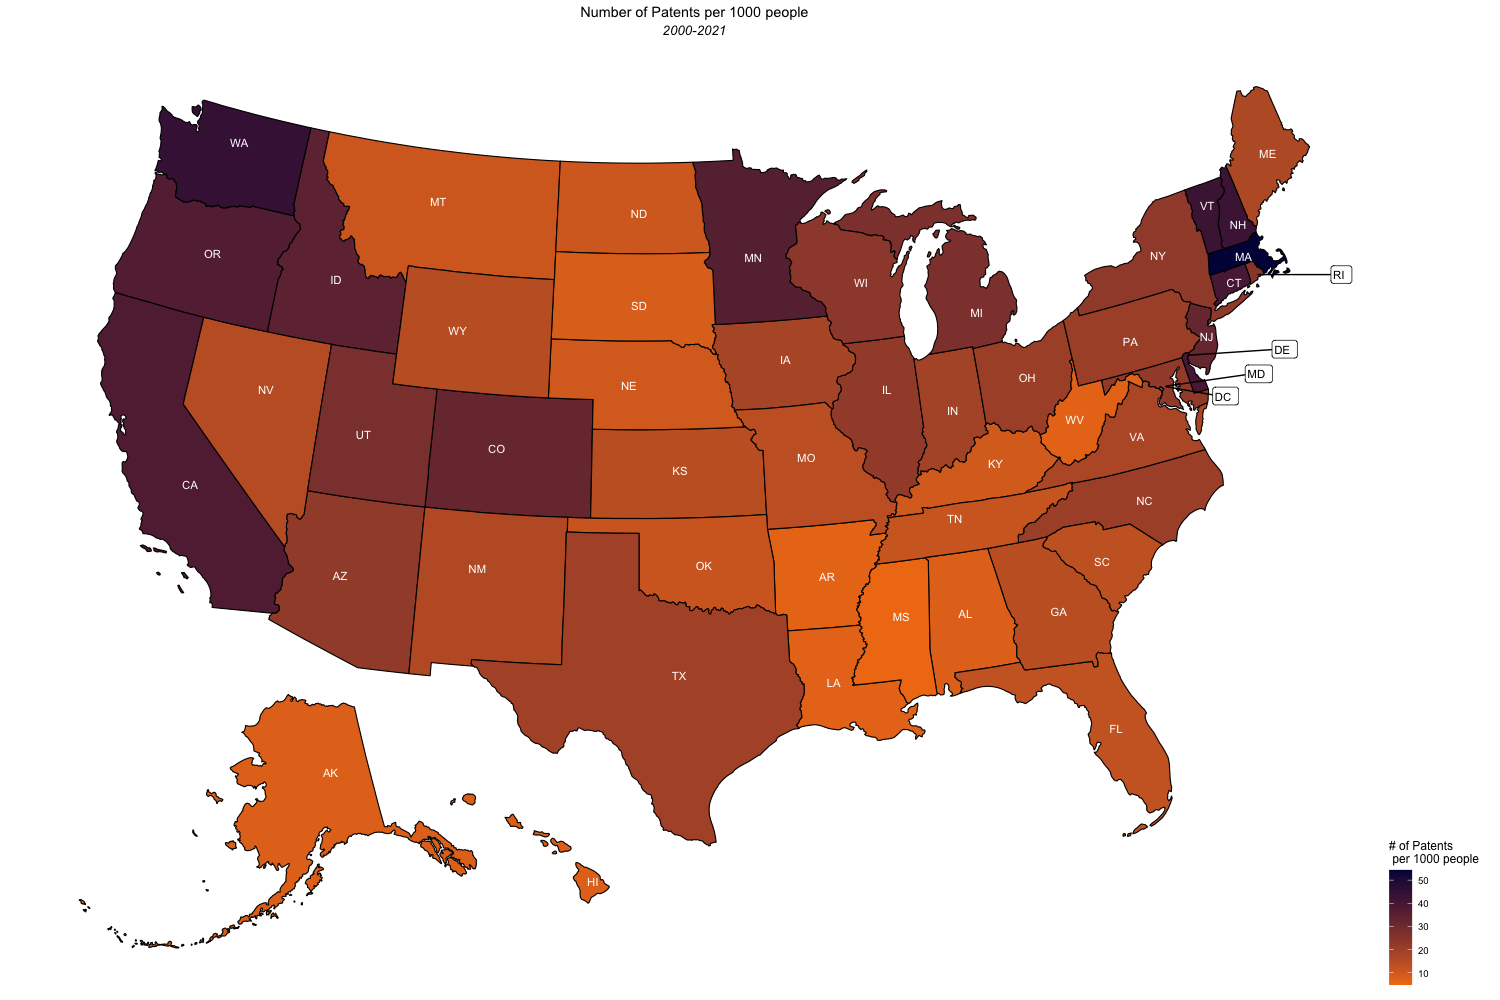 map with color gradient showing density of patents per 1,000 people